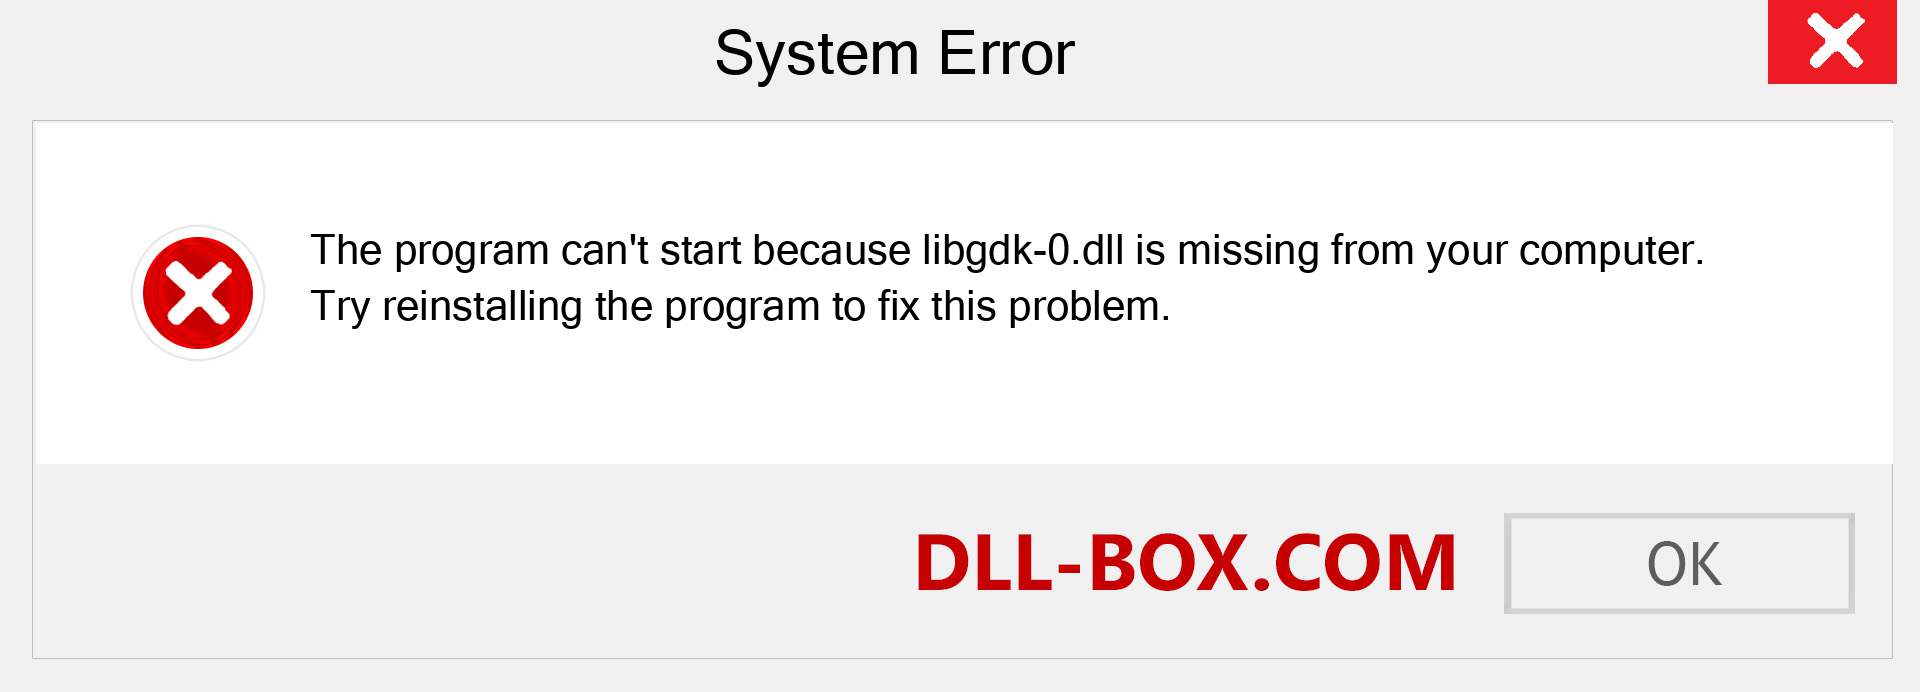  libgdk-0.dll file is missing?. Download for Windows 7, 8, 10 - Fix  libgdk-0 dll Missing Error on Windows, photos, images